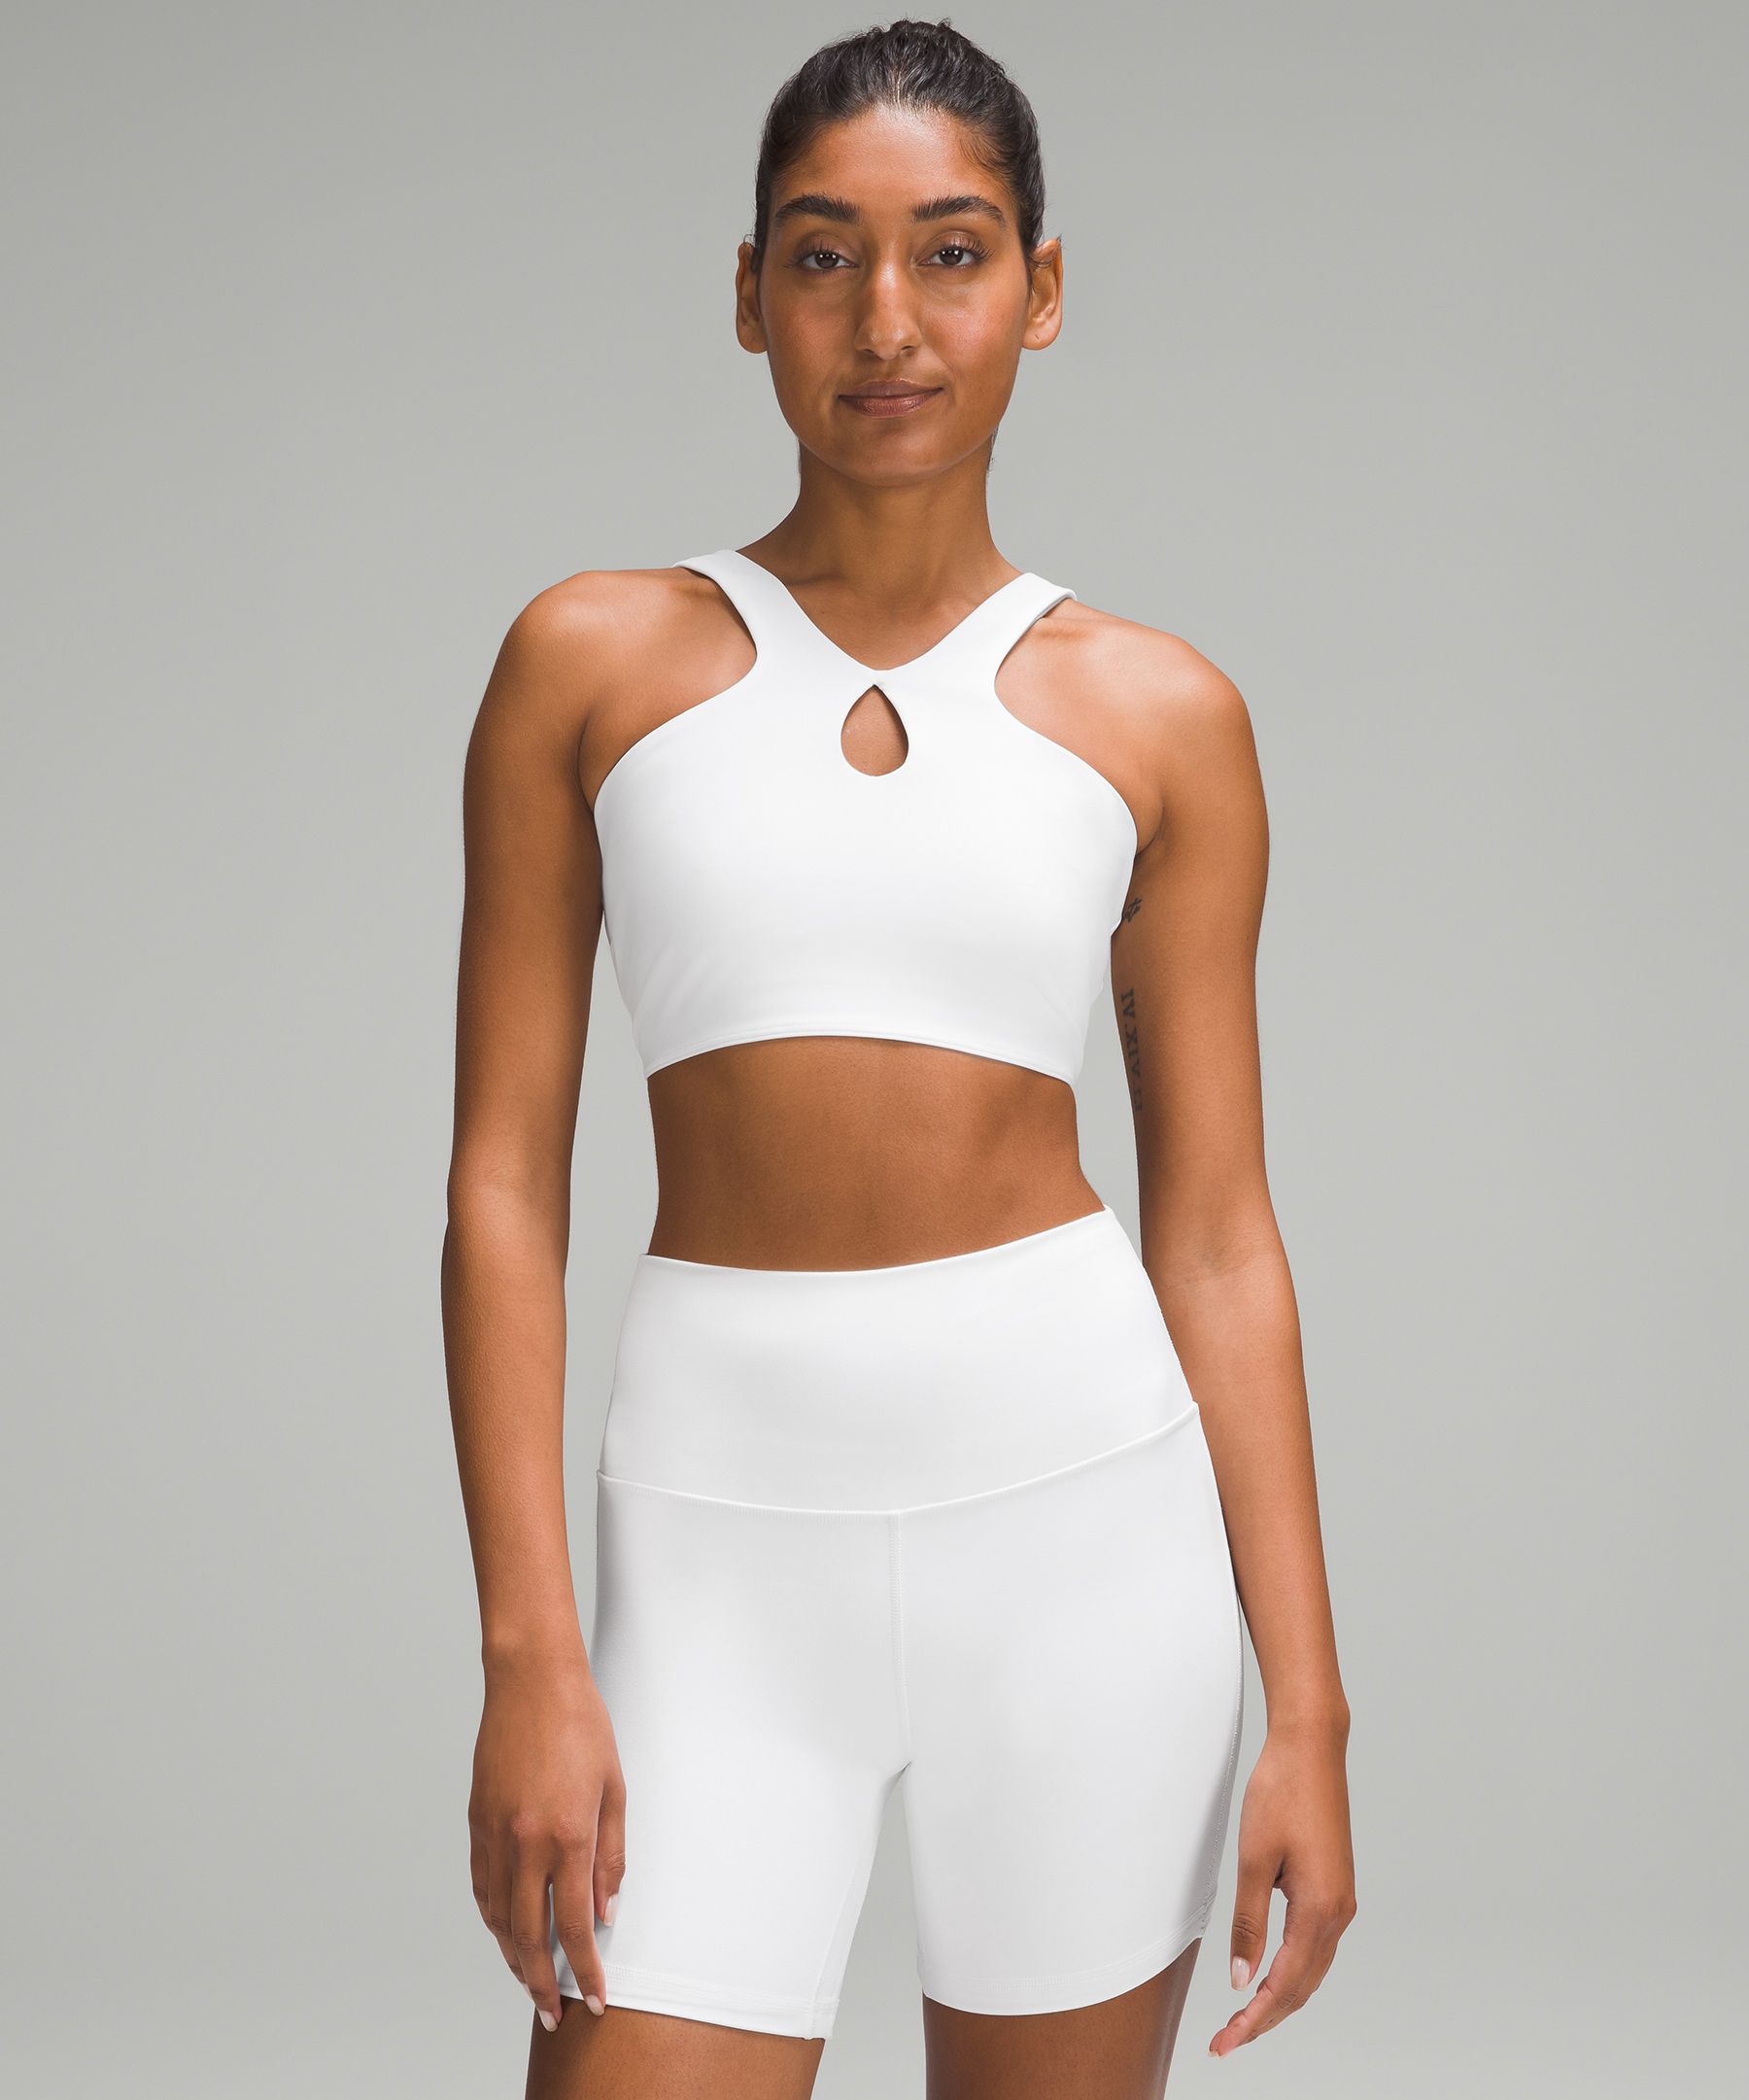 Lululemon SmoothCover Front Cut-Out Yoga Bra